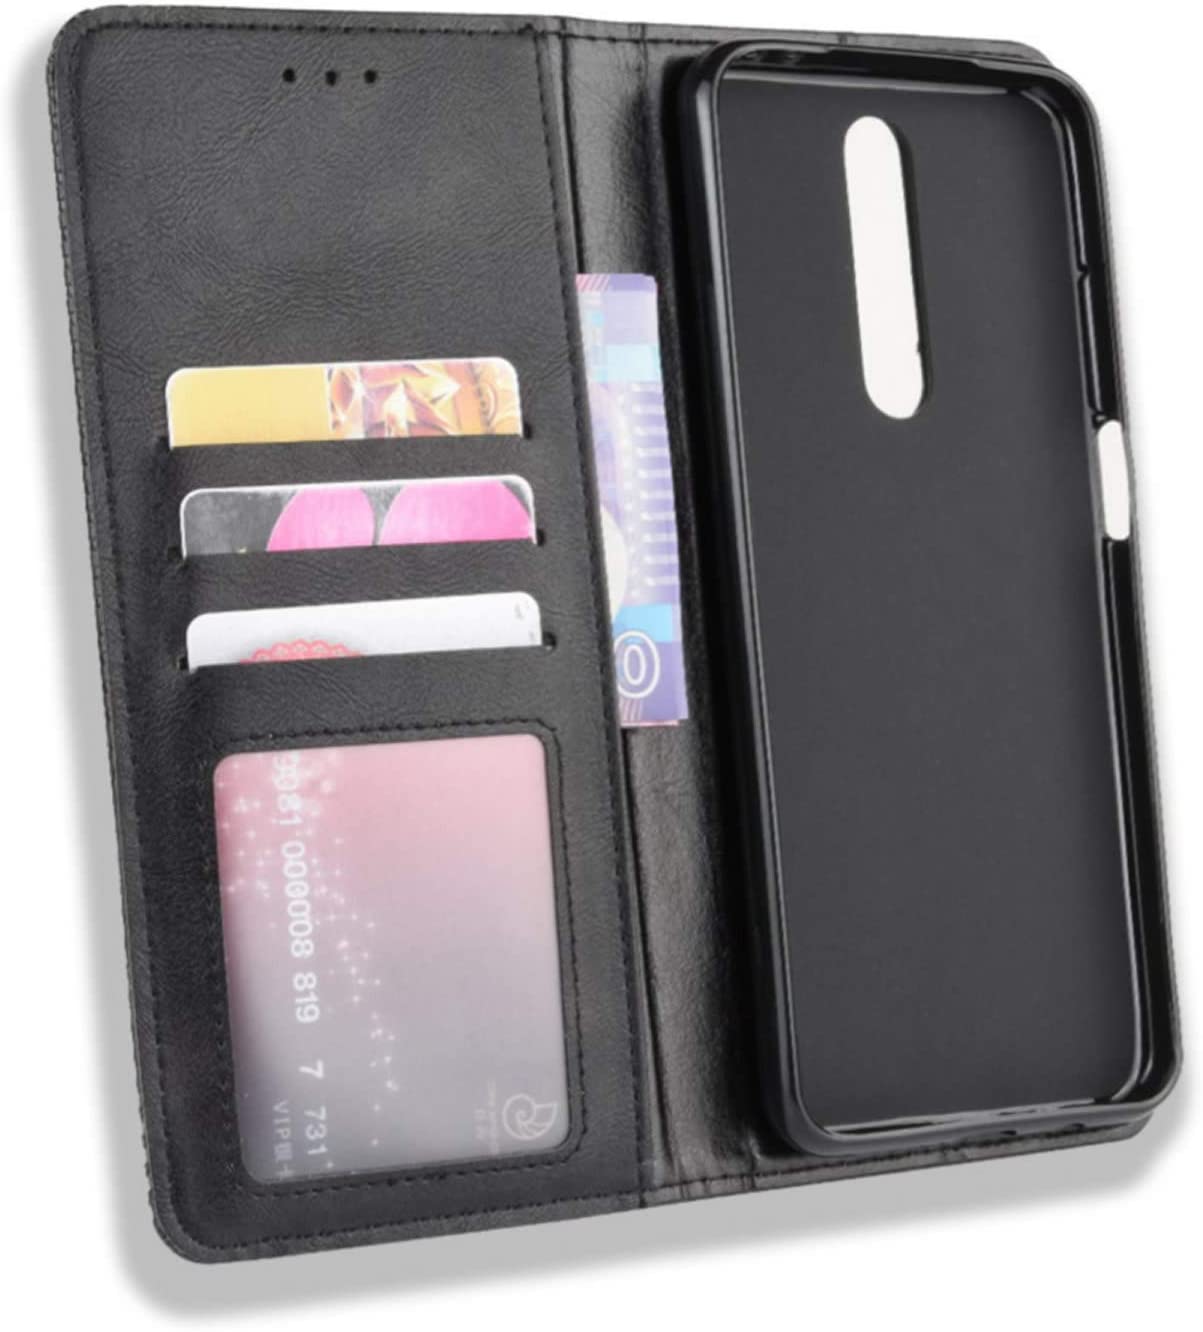 Poco X2 wallet flip cover case with soft tpu inner cover 